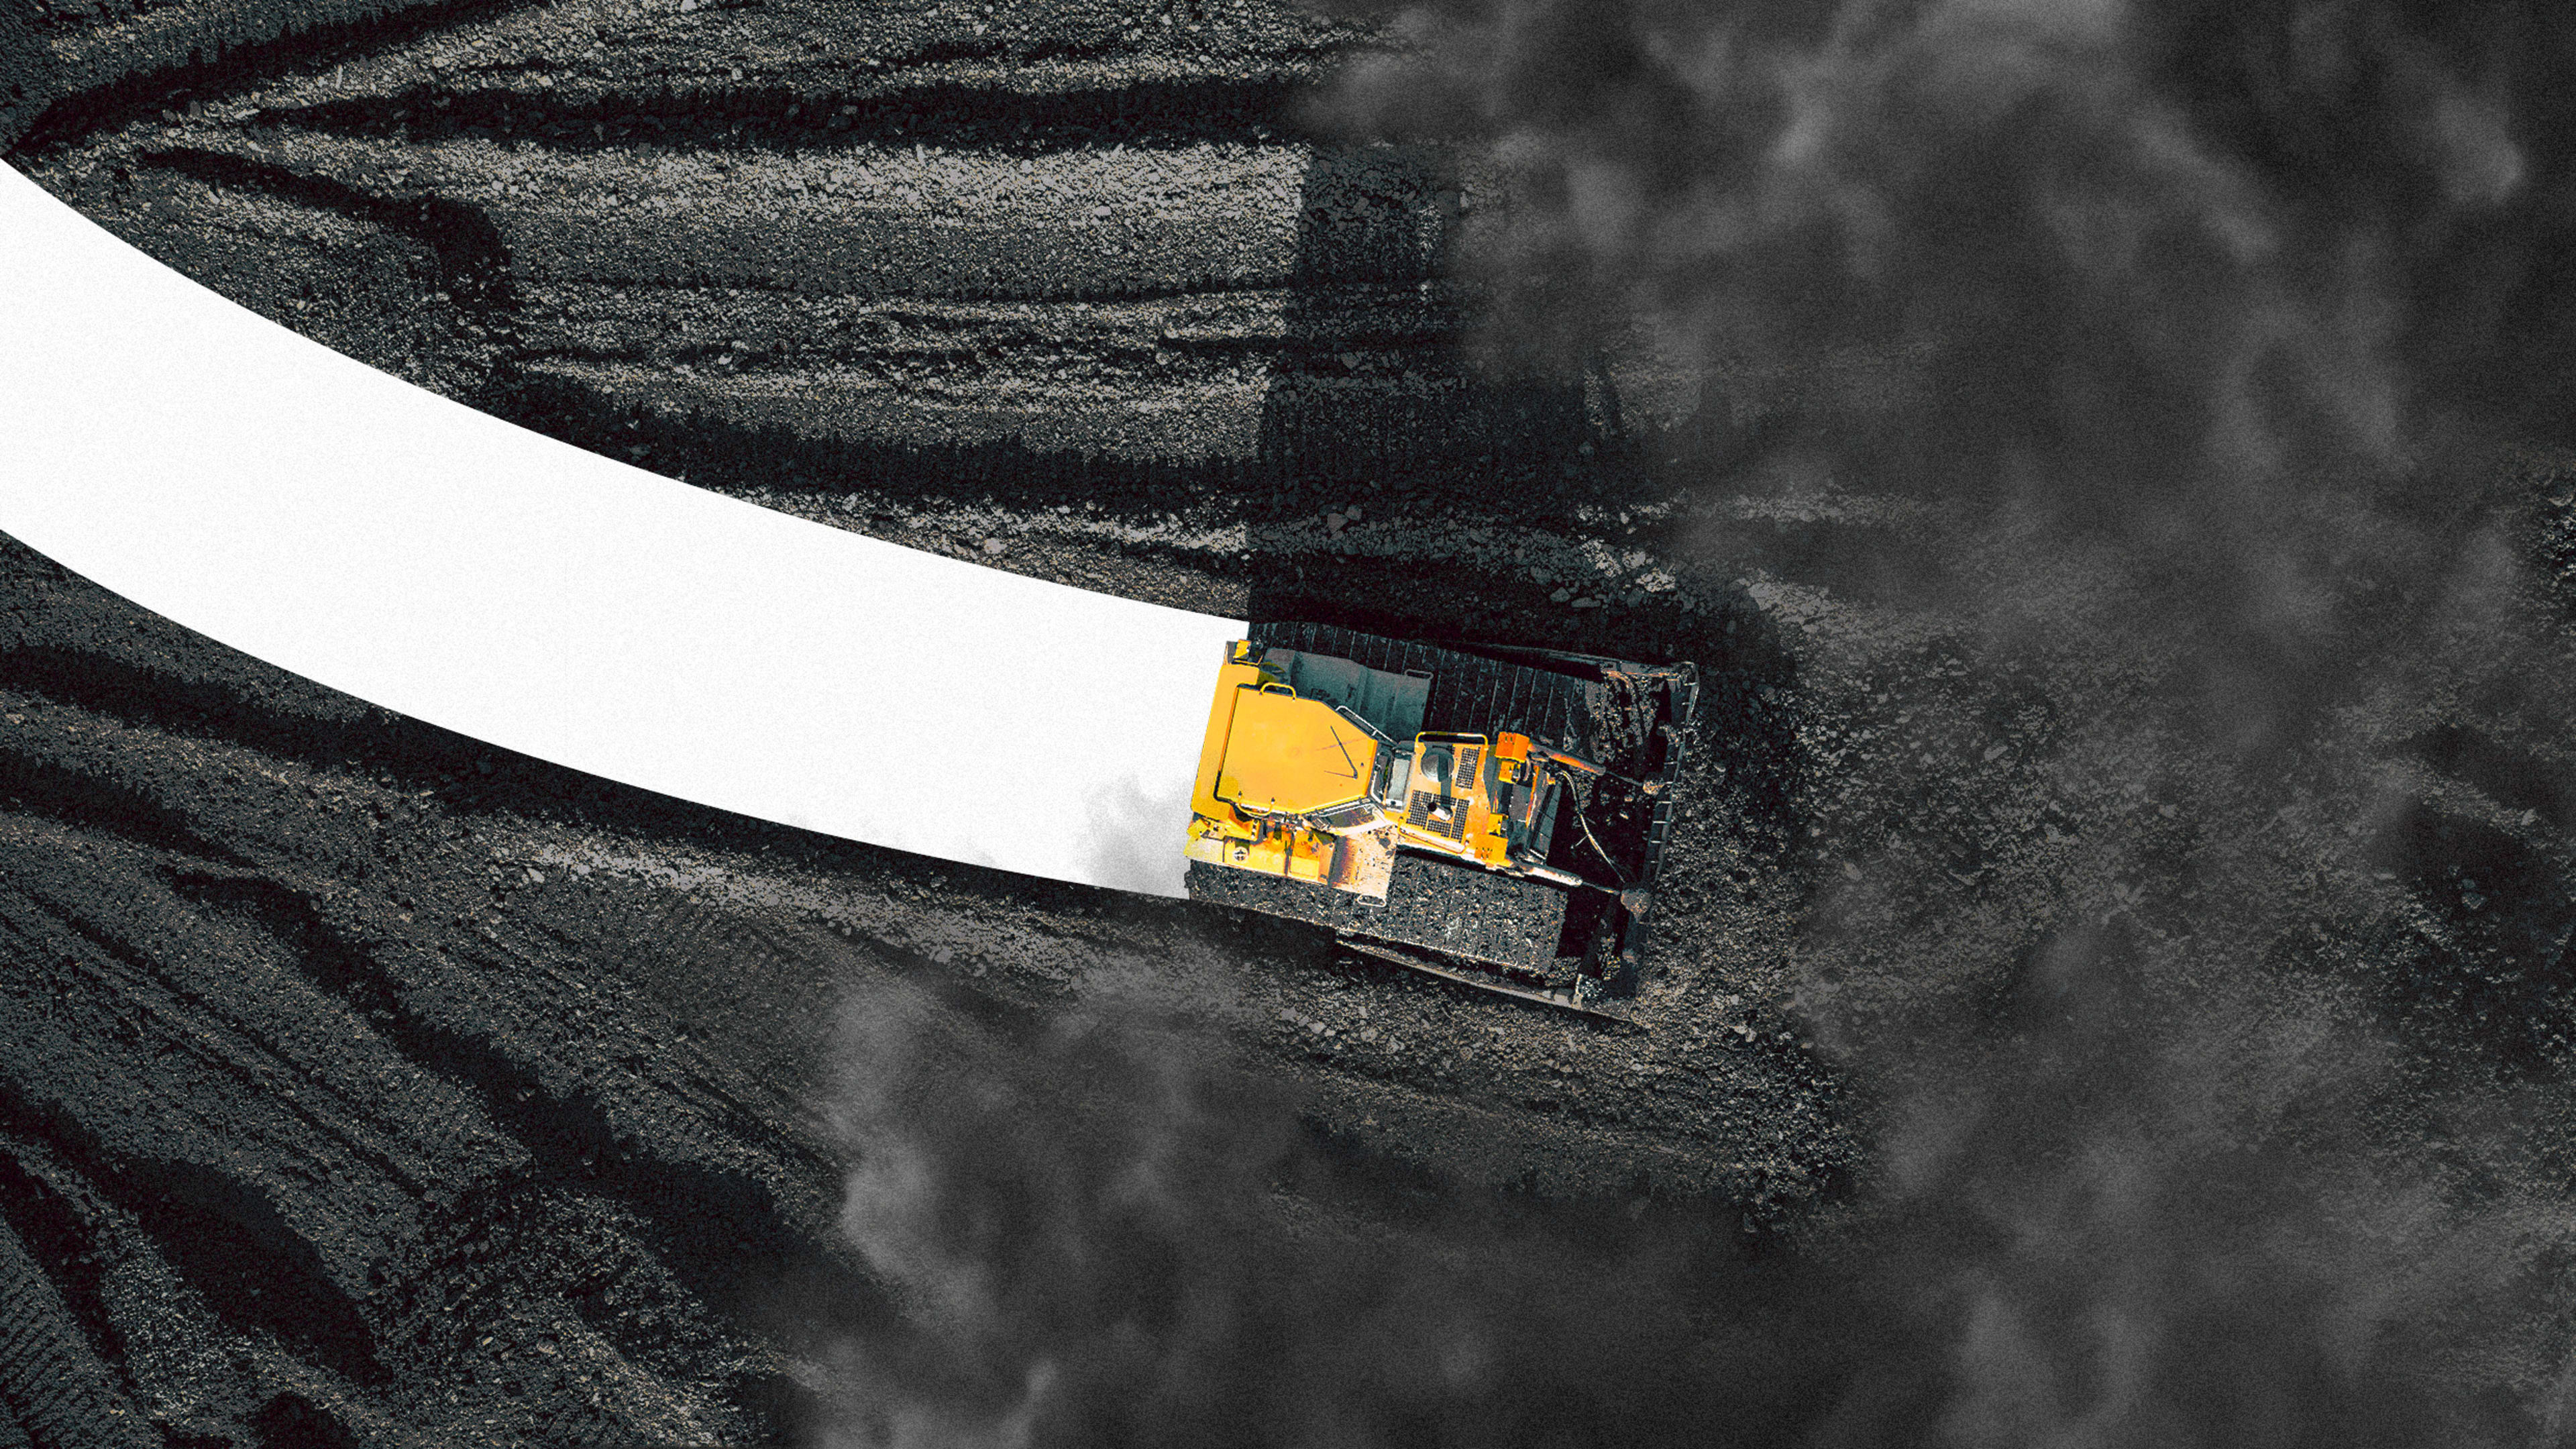 Europe is getting off coal even faster than expected